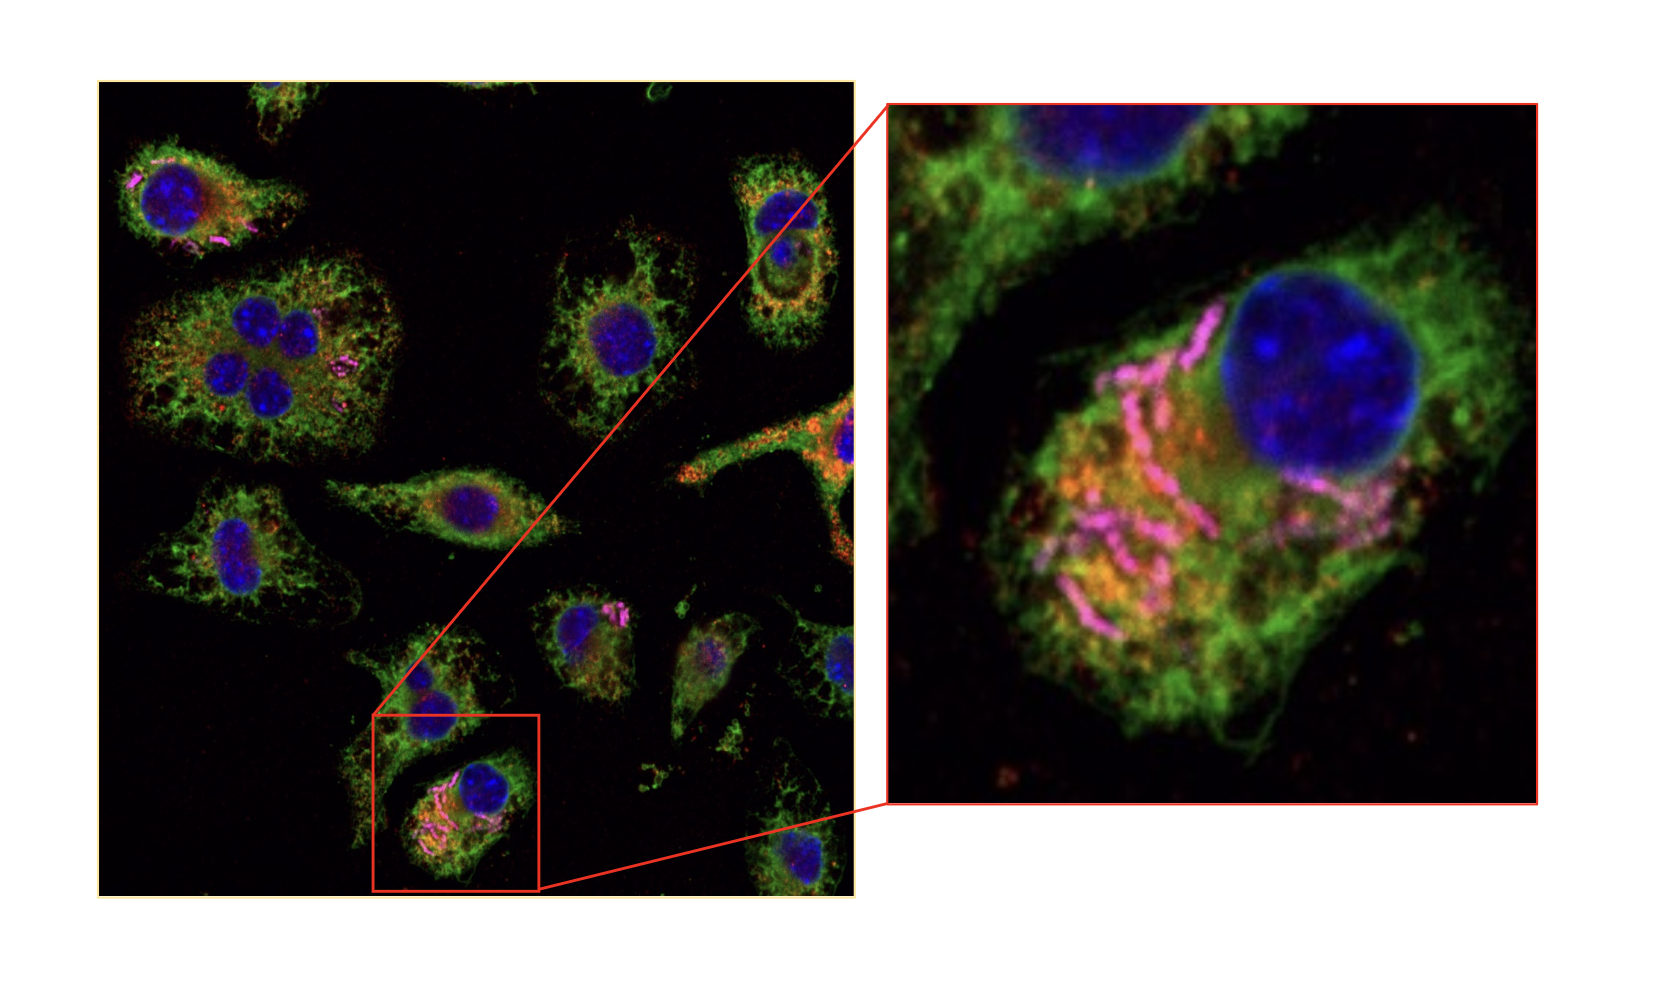 Figure 1: Images of mammalian cells harboring engineered endosymbionts. Engineered endosymbionts (pink) have been designed to live in the cytoplasm of mammalian cells where they remain viable and intact, visible as pink, rod-like structures. The DNA in the nuclei of the mammalian host cells is stained blue, the phagosomes that could destroy endosymbionts are stained red, and the membranes of the mammalian cells are stained green. Micrographs were taken by Drs. Cody Madsen (now at Livermore National Laboratories) and Ashley Makela in the Contag lab. 